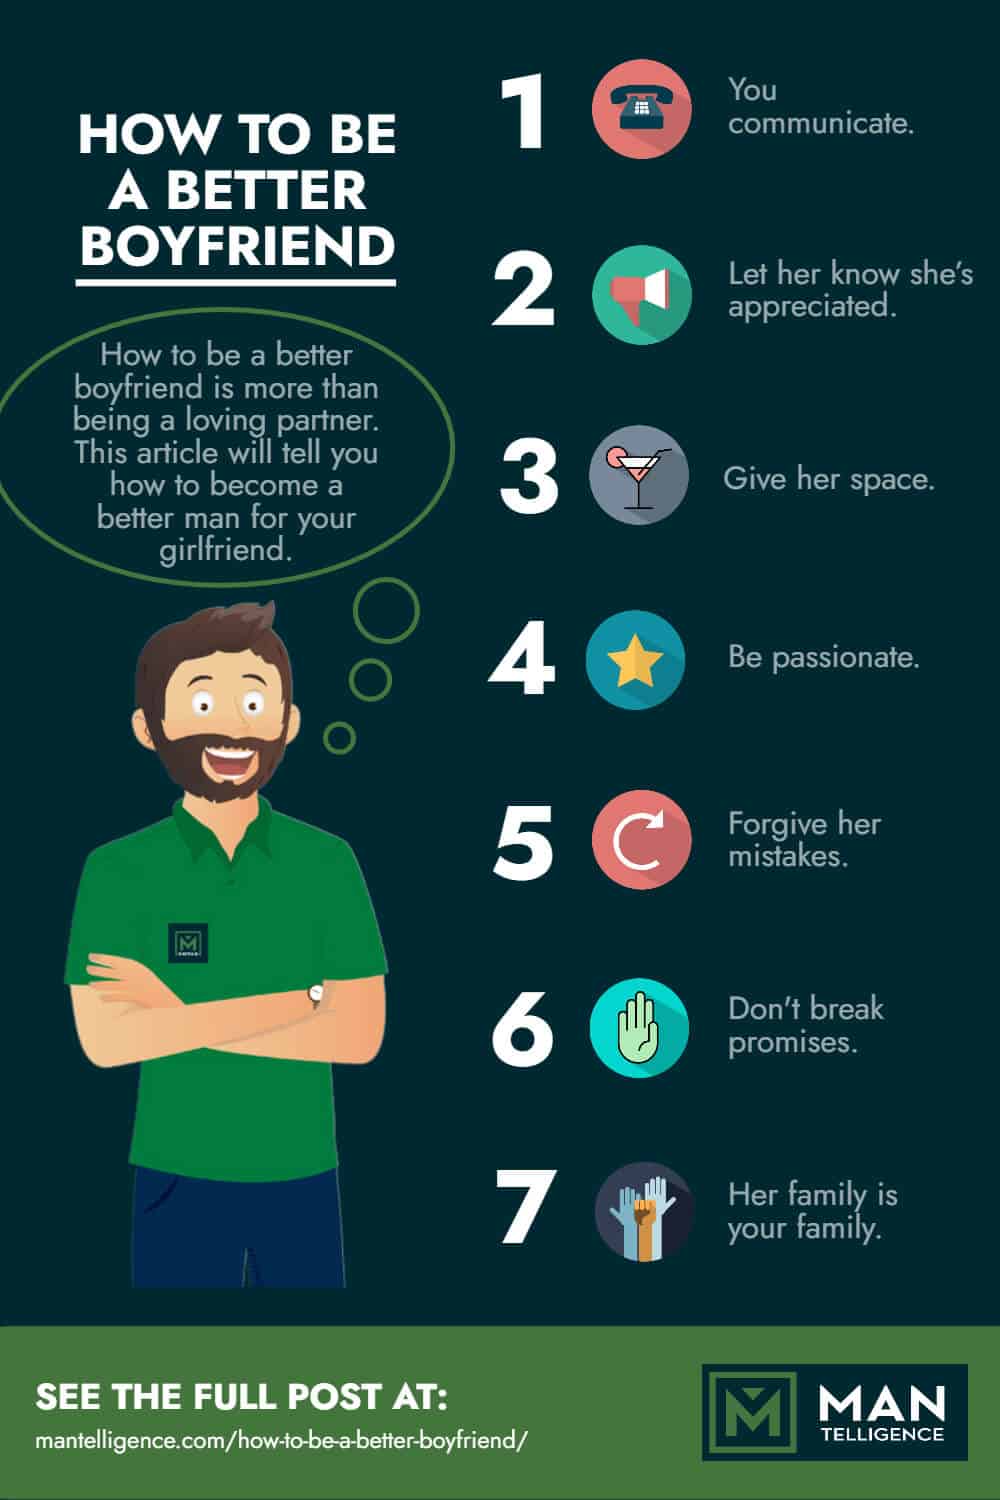 How To Be A Better Boyfriend - infographic